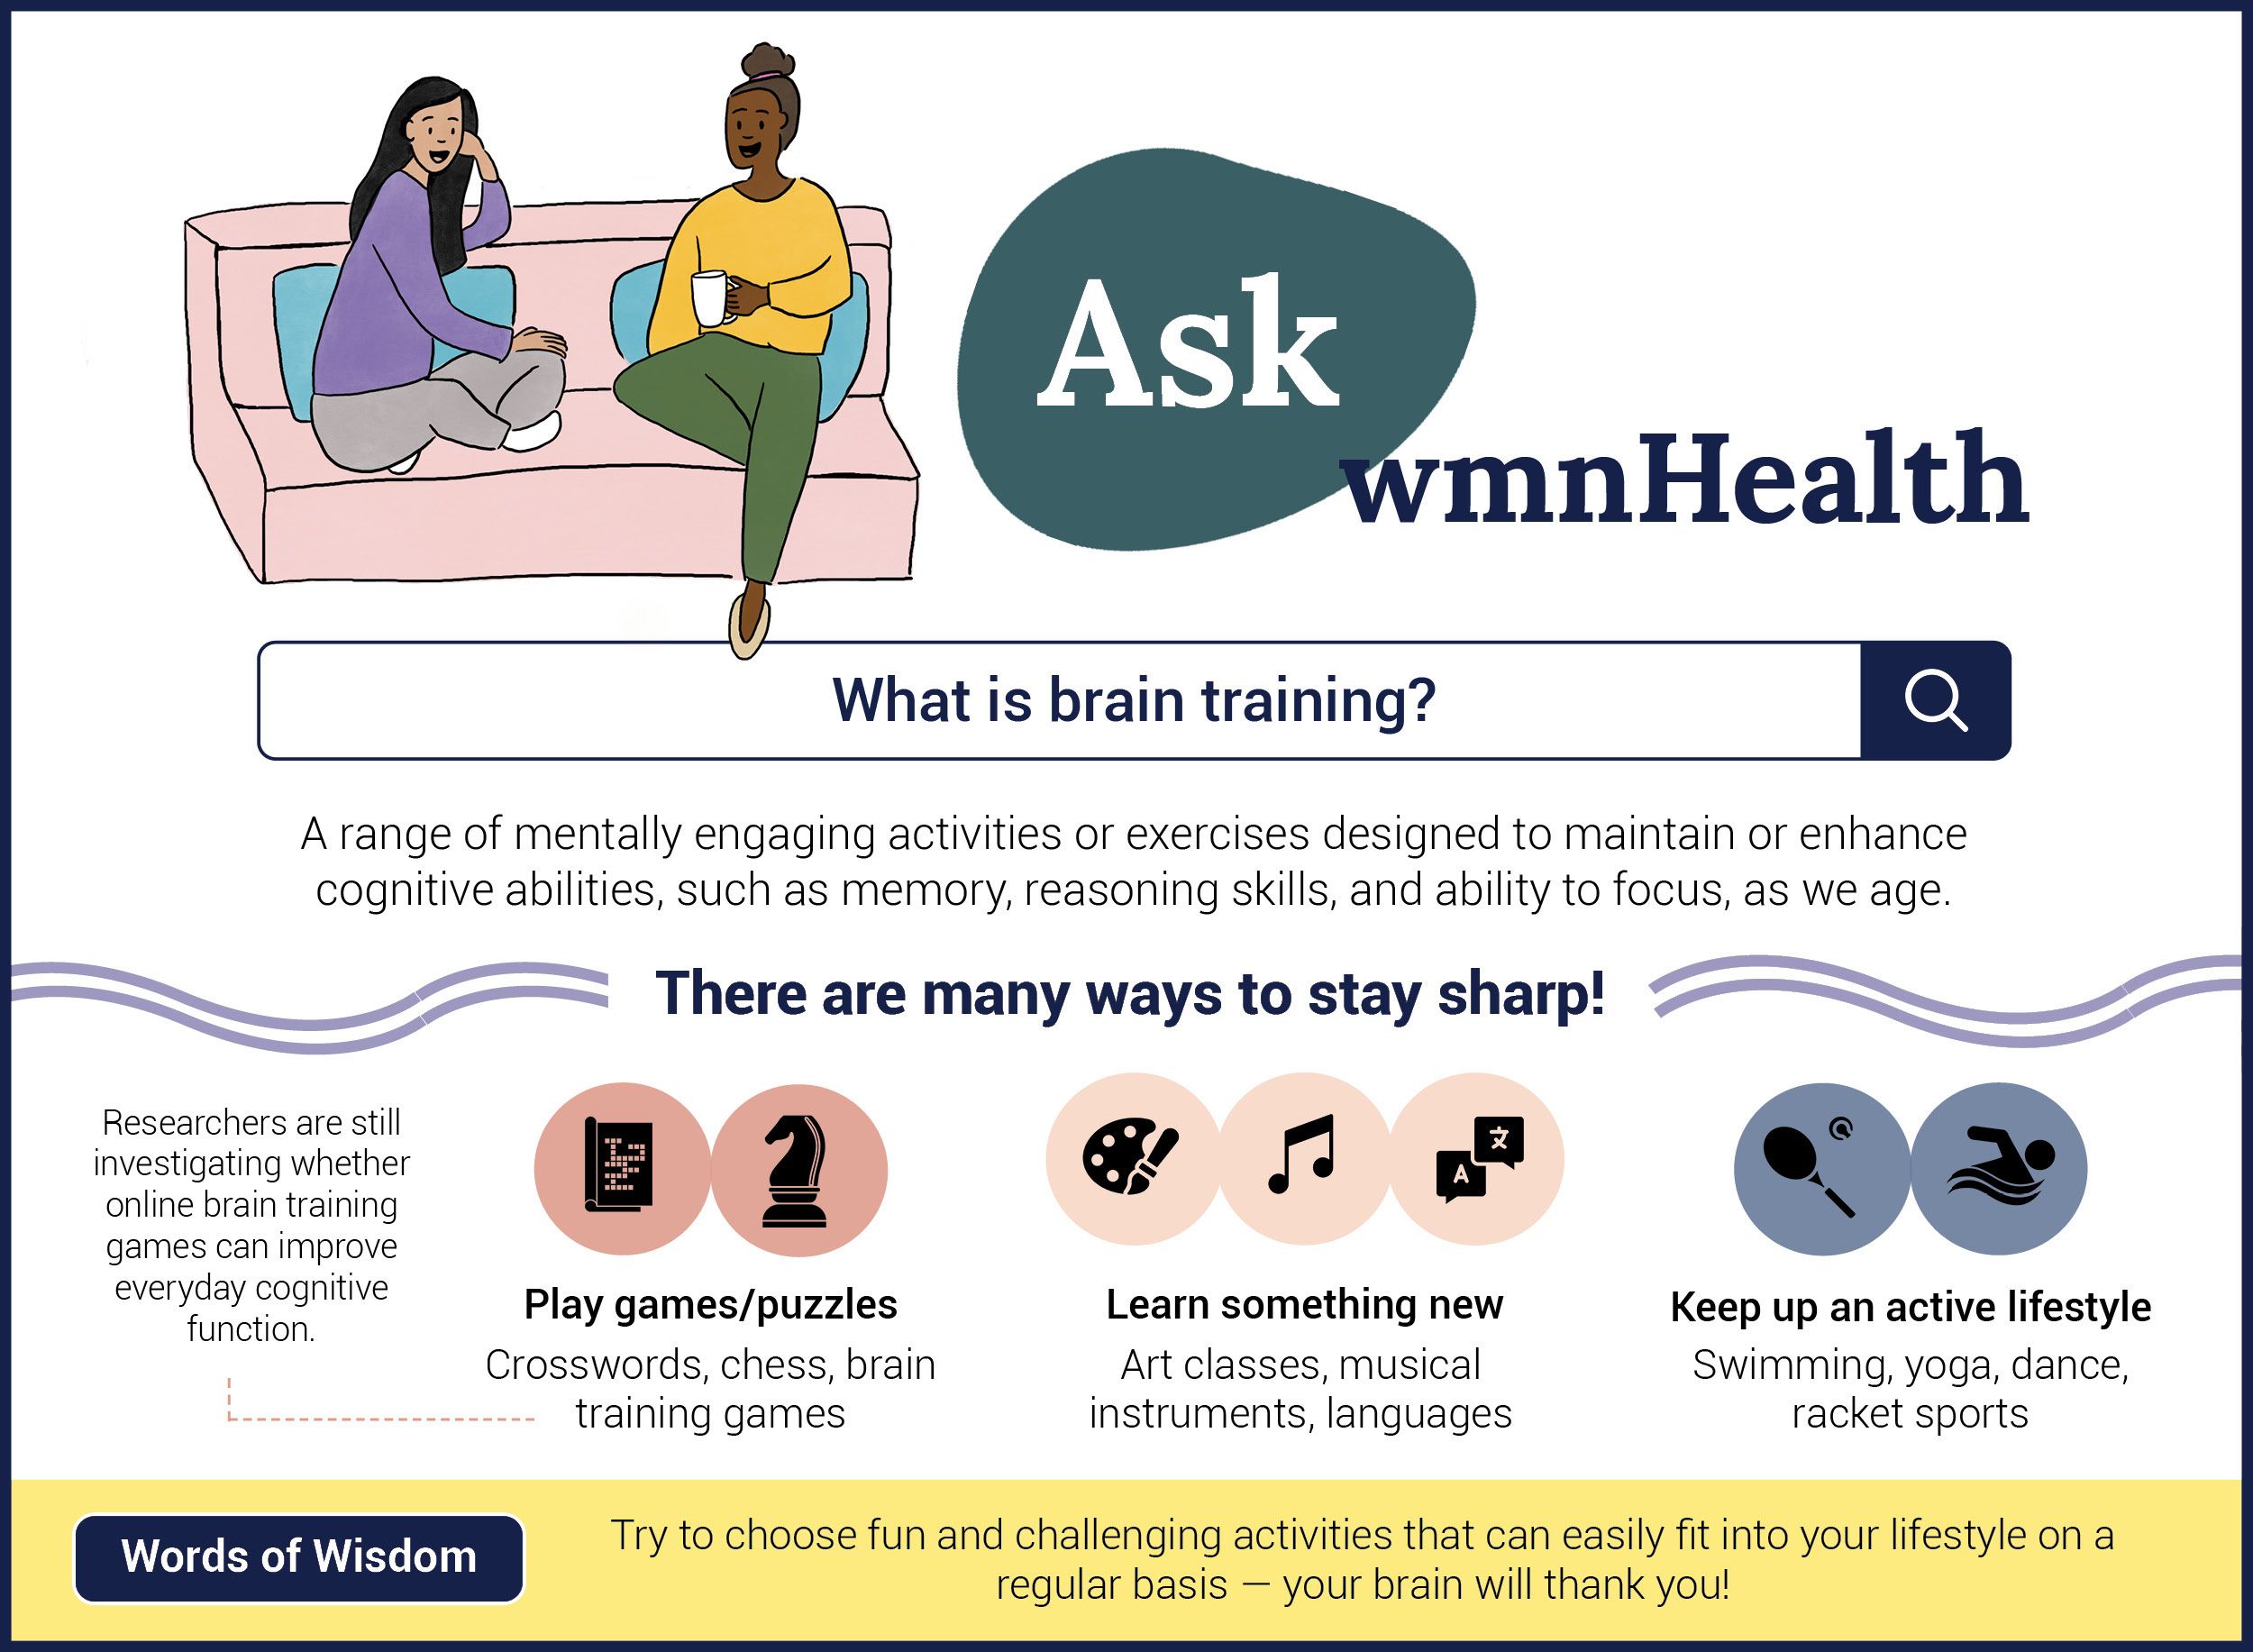 Ask wmnHealth: What is brain training?